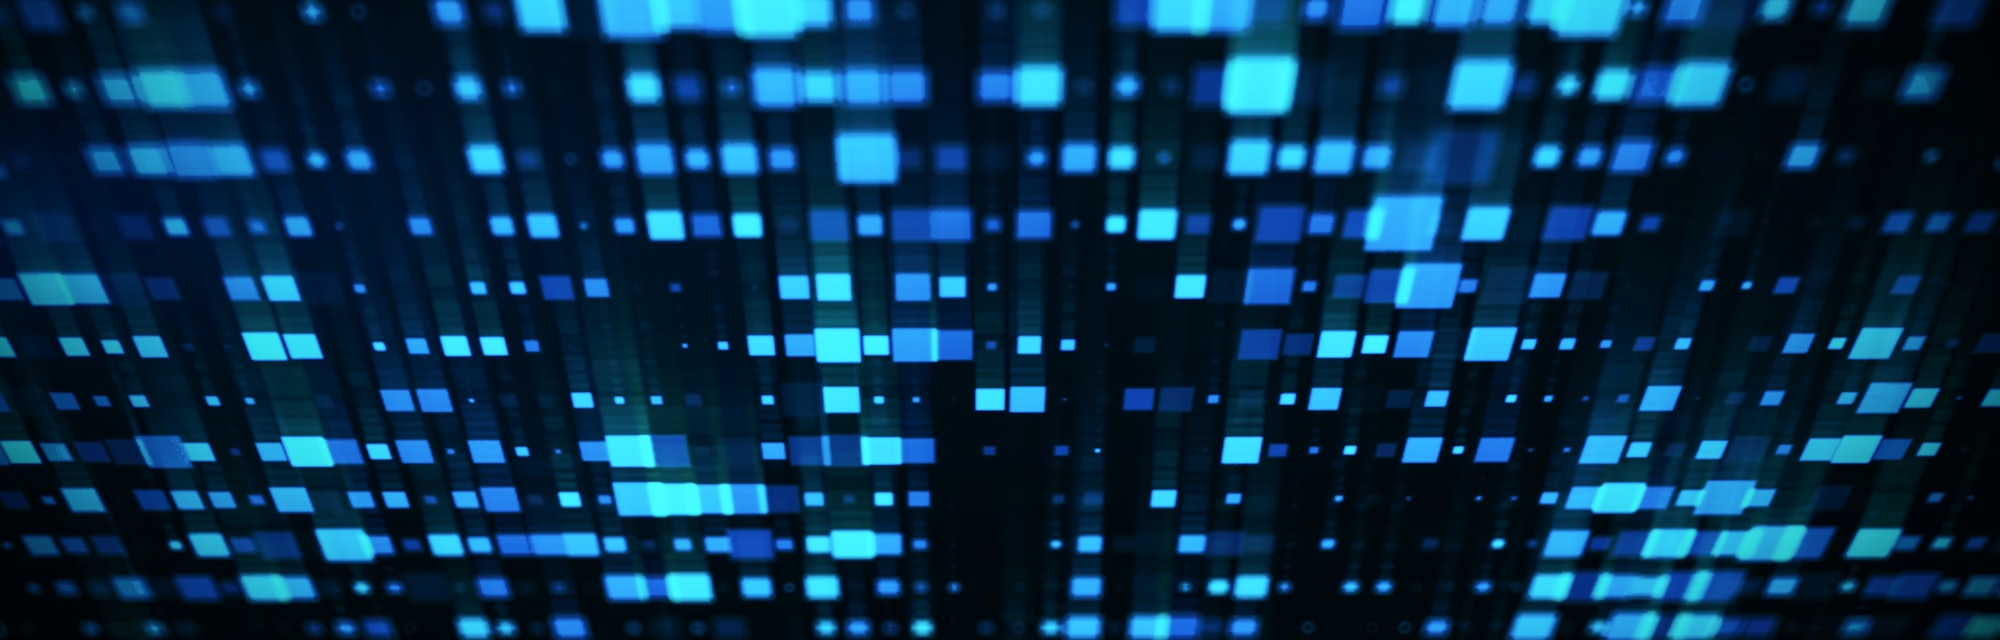 Blue Abstract Blurred Squares Background